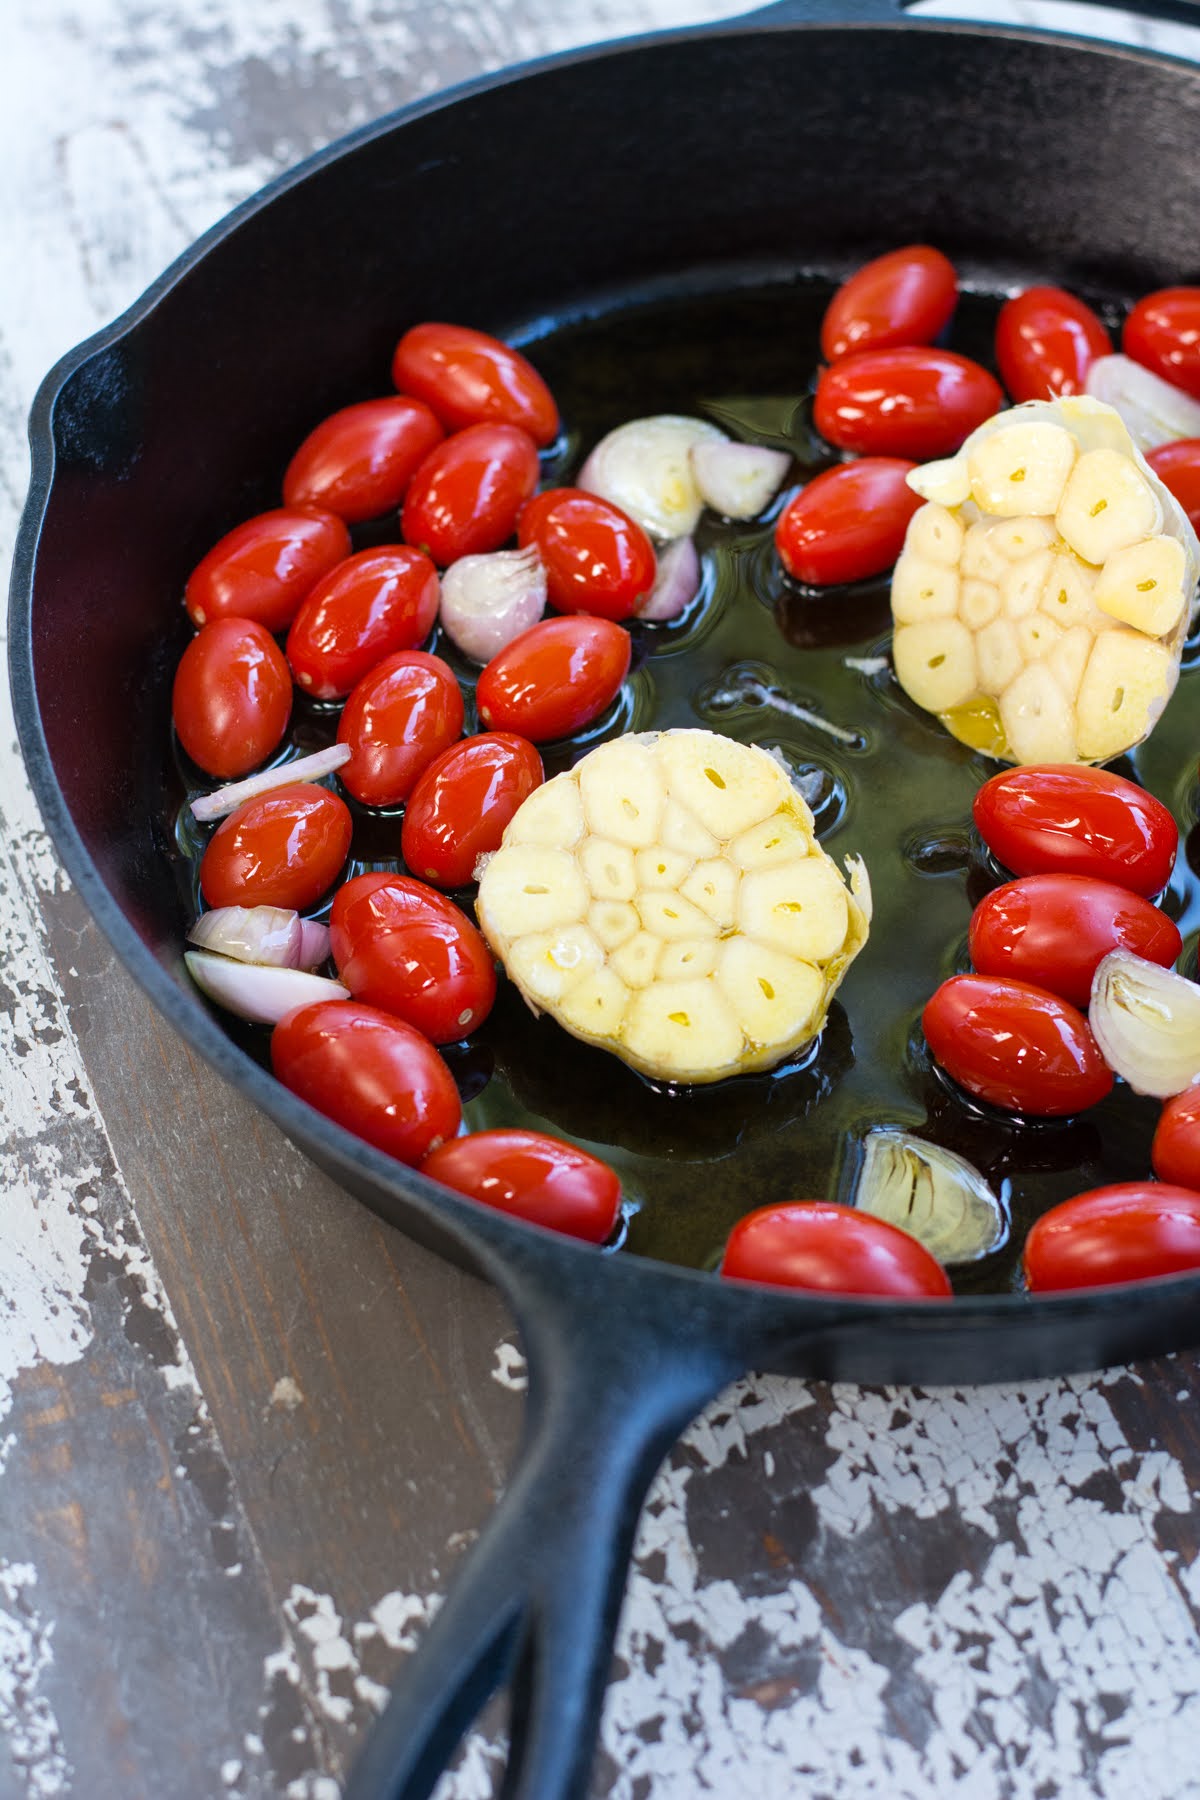 Tomatoes, shallots, and cut heads of garlic in a skillet with olive oil.